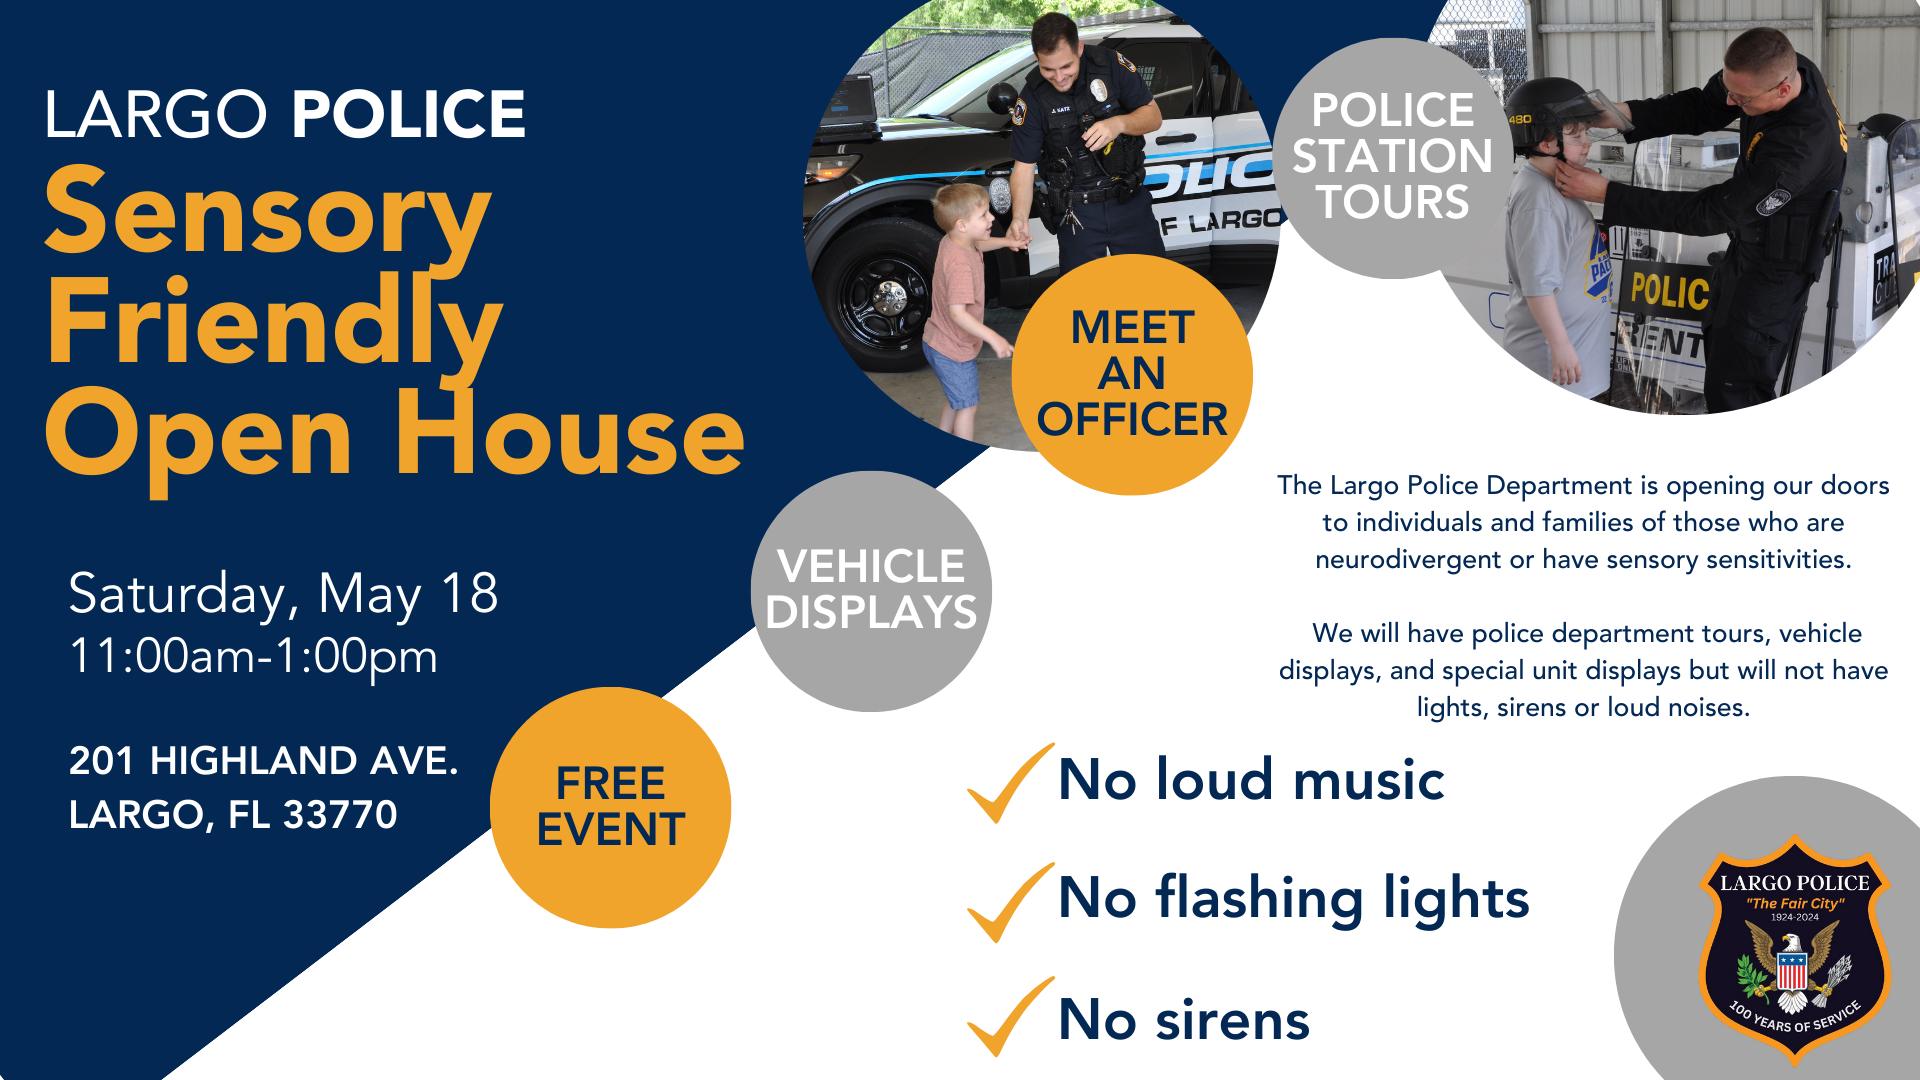 This graphic is for the Largo Police Sensory Friendly Open Hours.